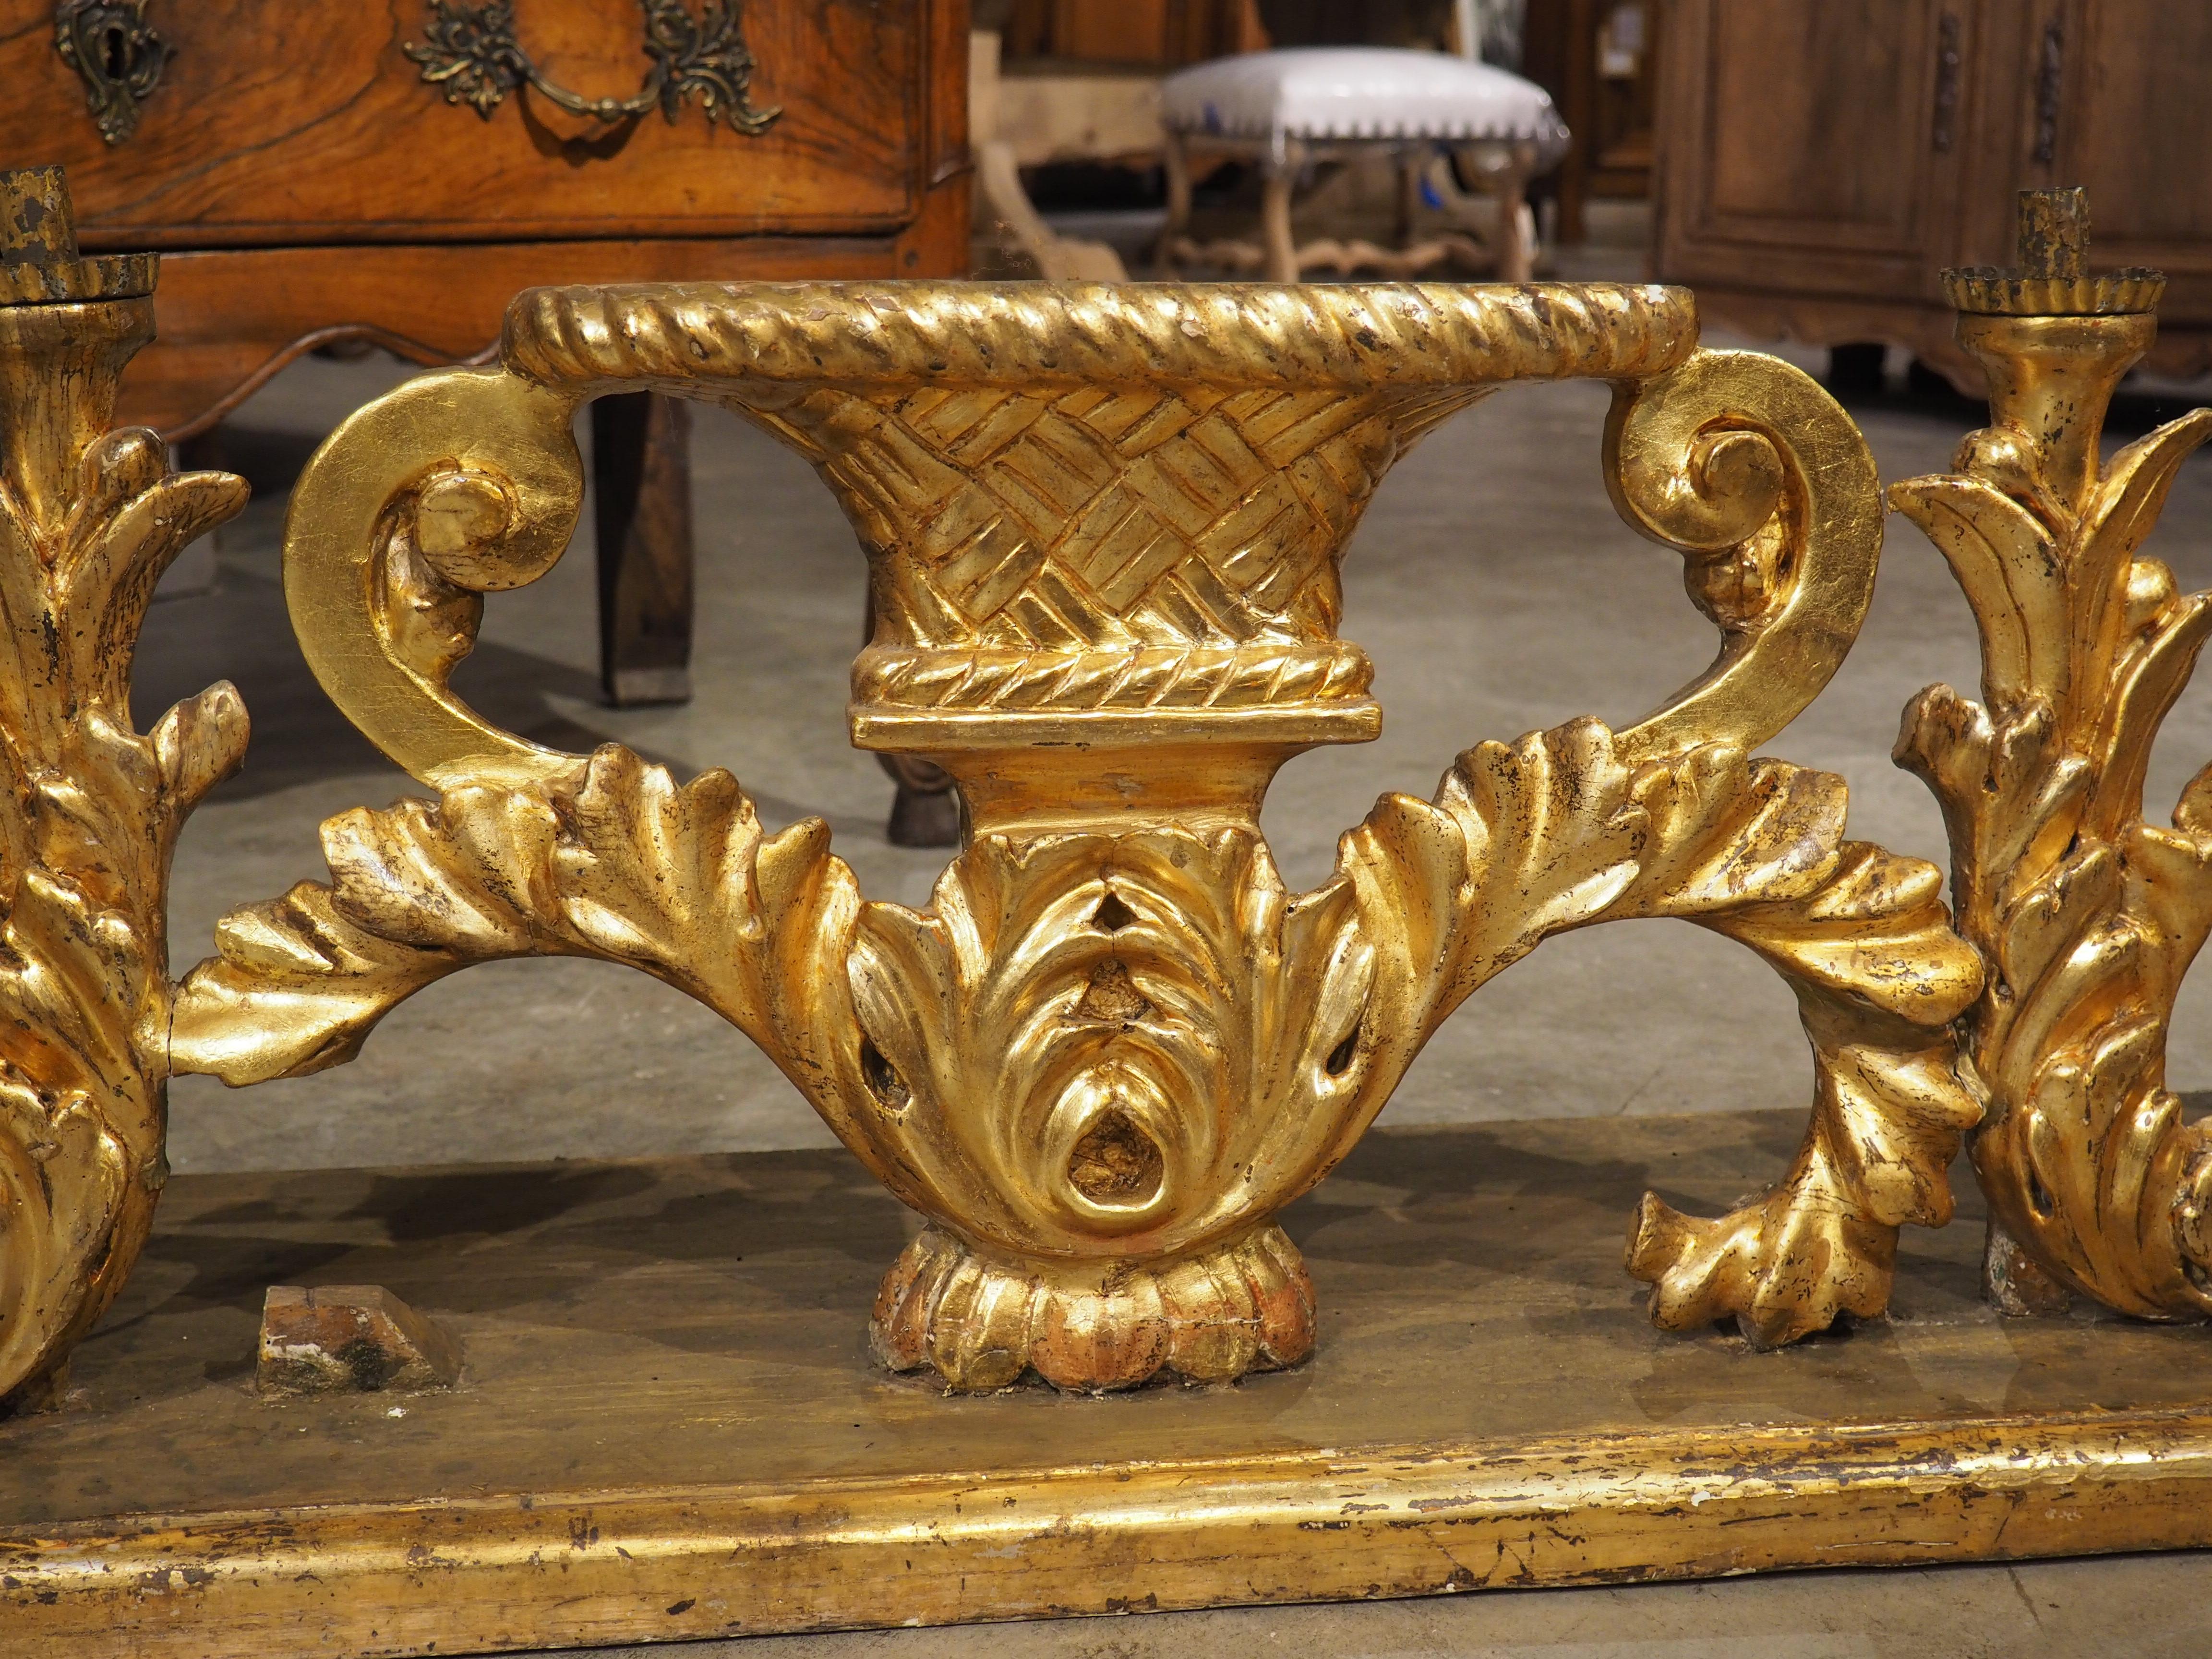 Circa 1750 Carved and Gilded Altar Candelabra from Tuscany, Italy 73 inches Long In Good Condition For Sale In Dallas, TX